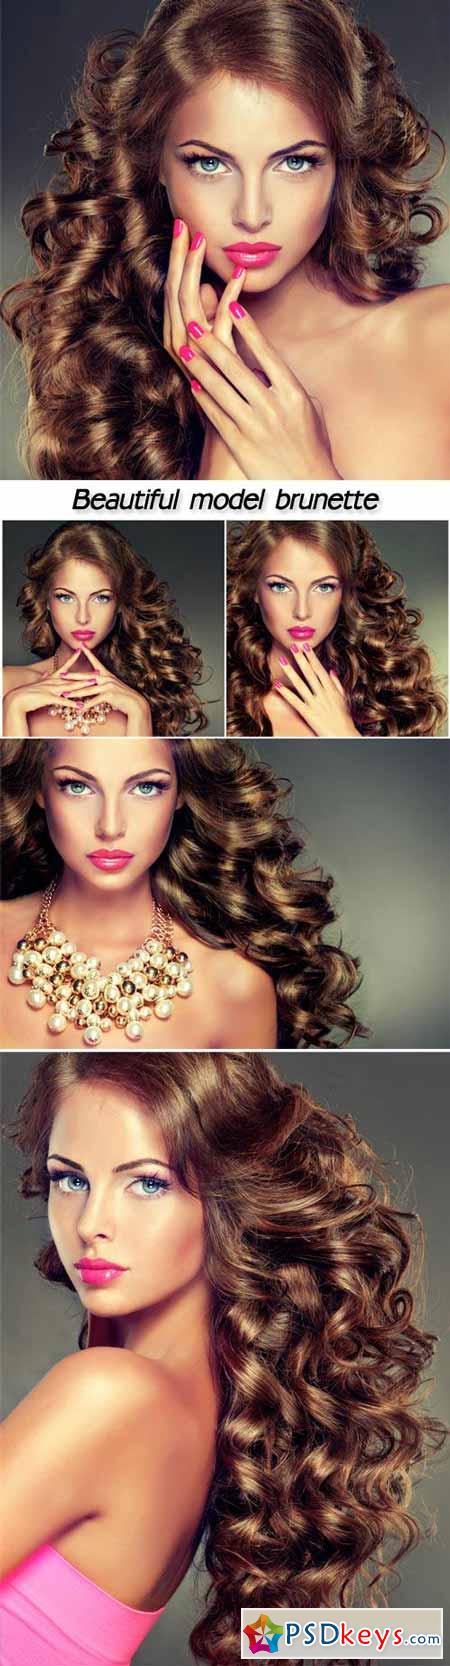 Beautiful model brunette with long curled hair